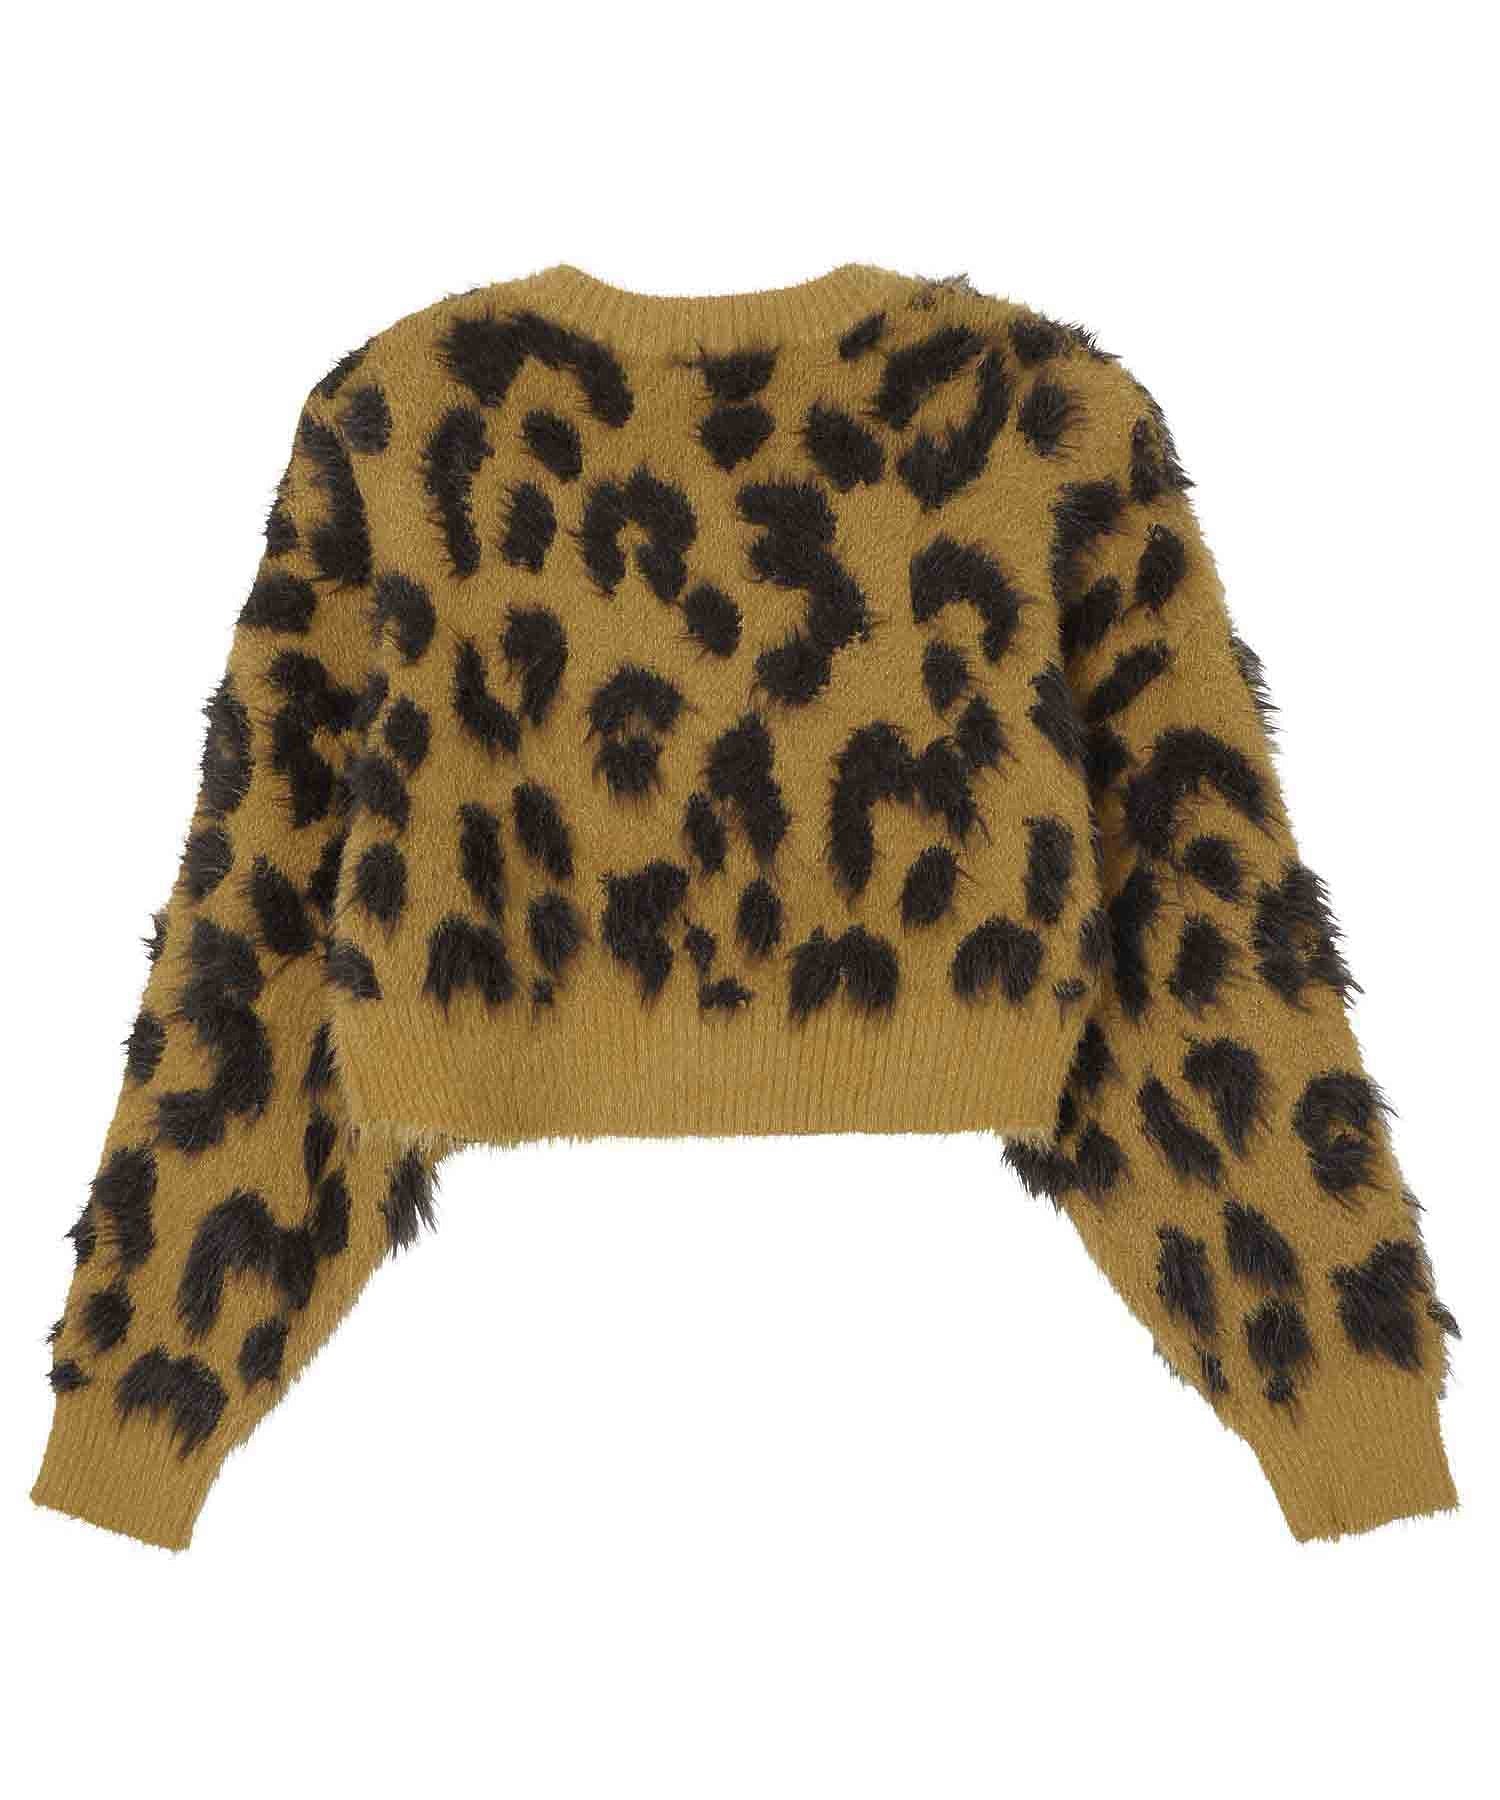 LEOPARD CROPPED KNIT TOP X-girl